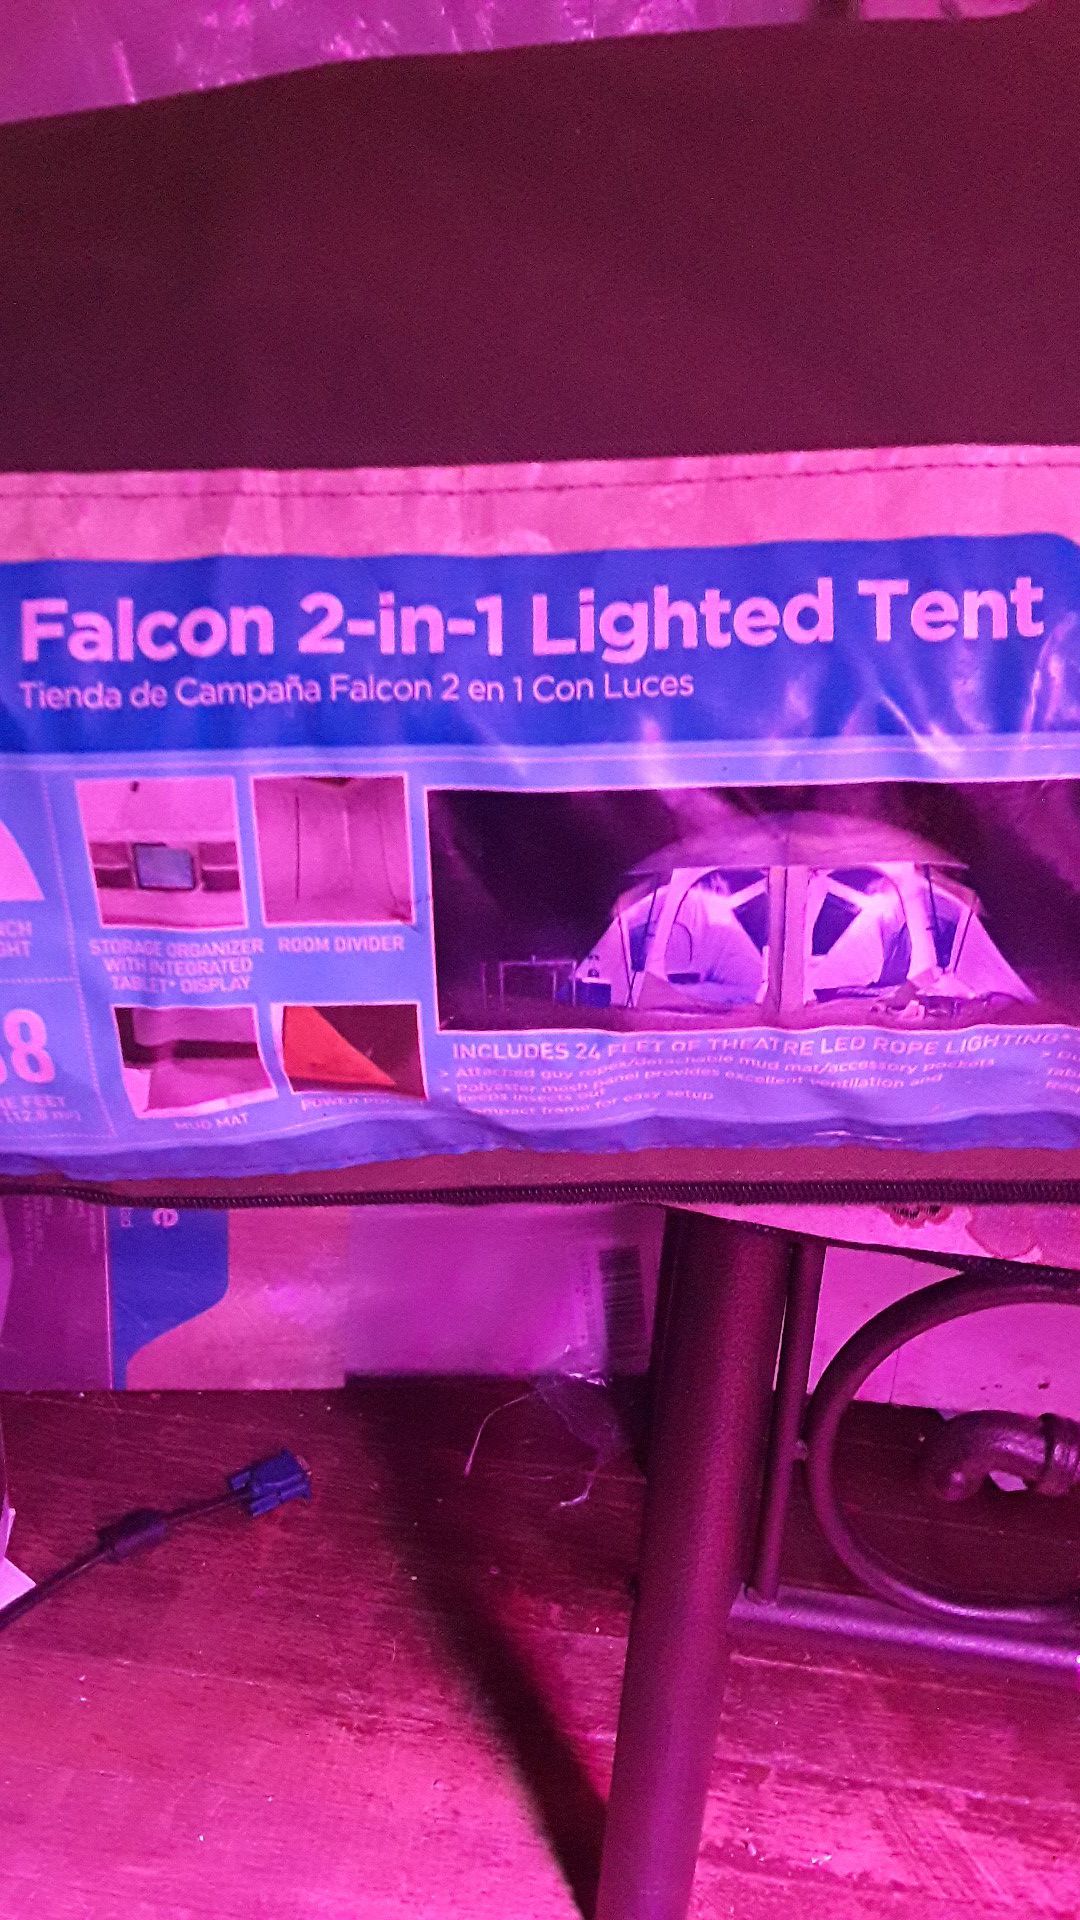 Falcon 2 in 1 lighted tent